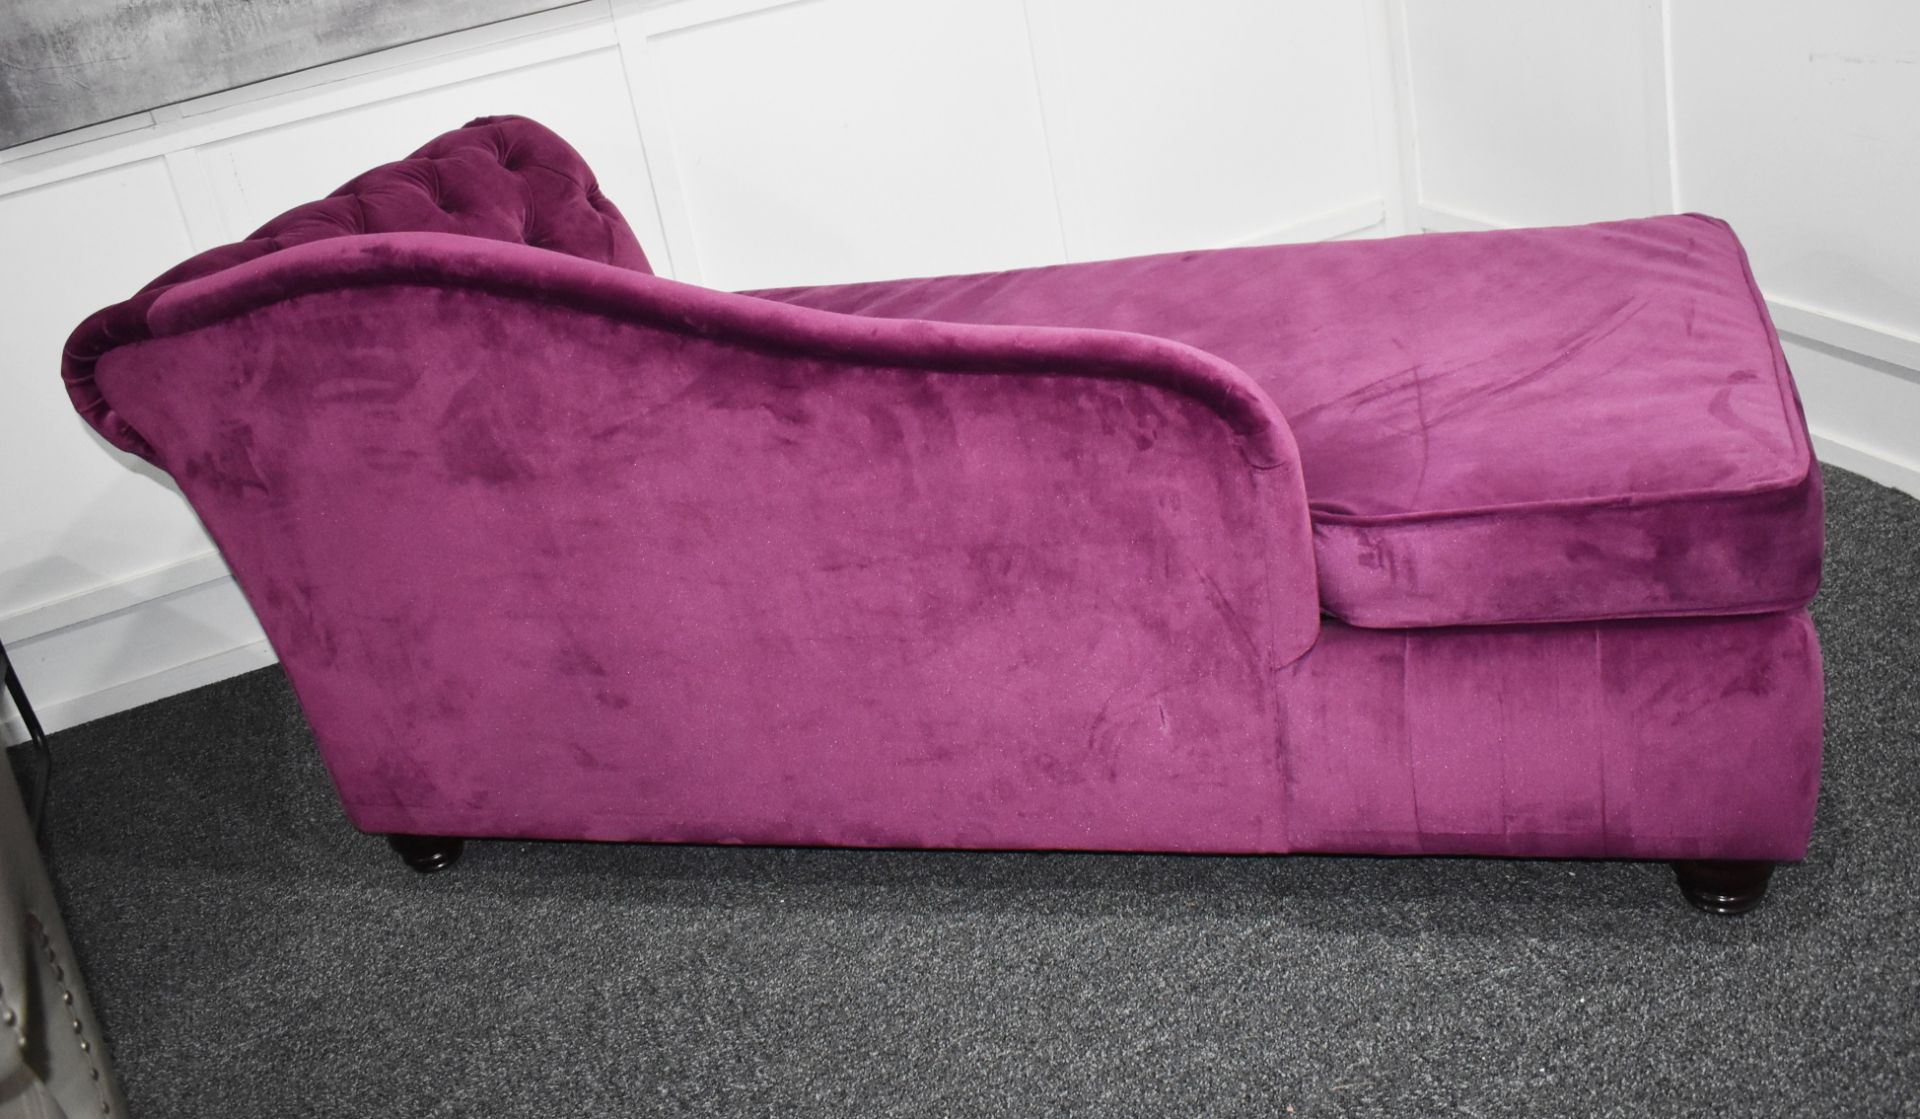 1 x Elegant Chesterfield-style Button-back Chaise Lounge, Richly Upholstered in a Mulberry - Image 6 of 10